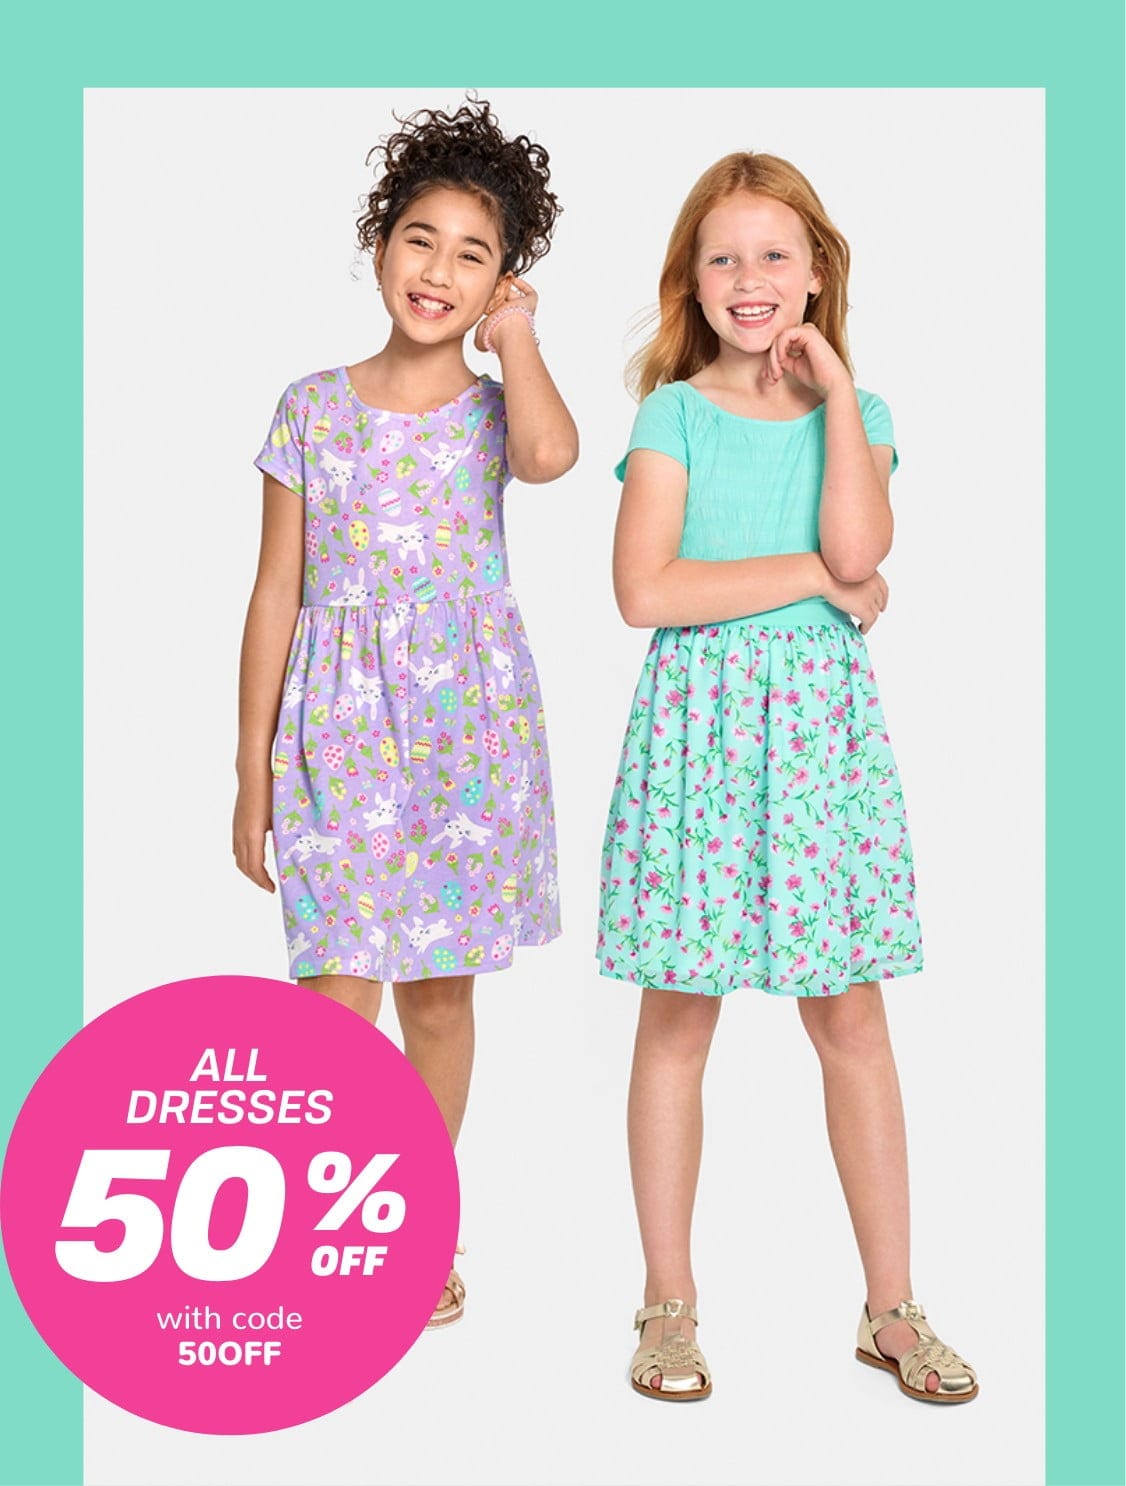 Clothes for girls - All you need in girls' clothing, NAME IT